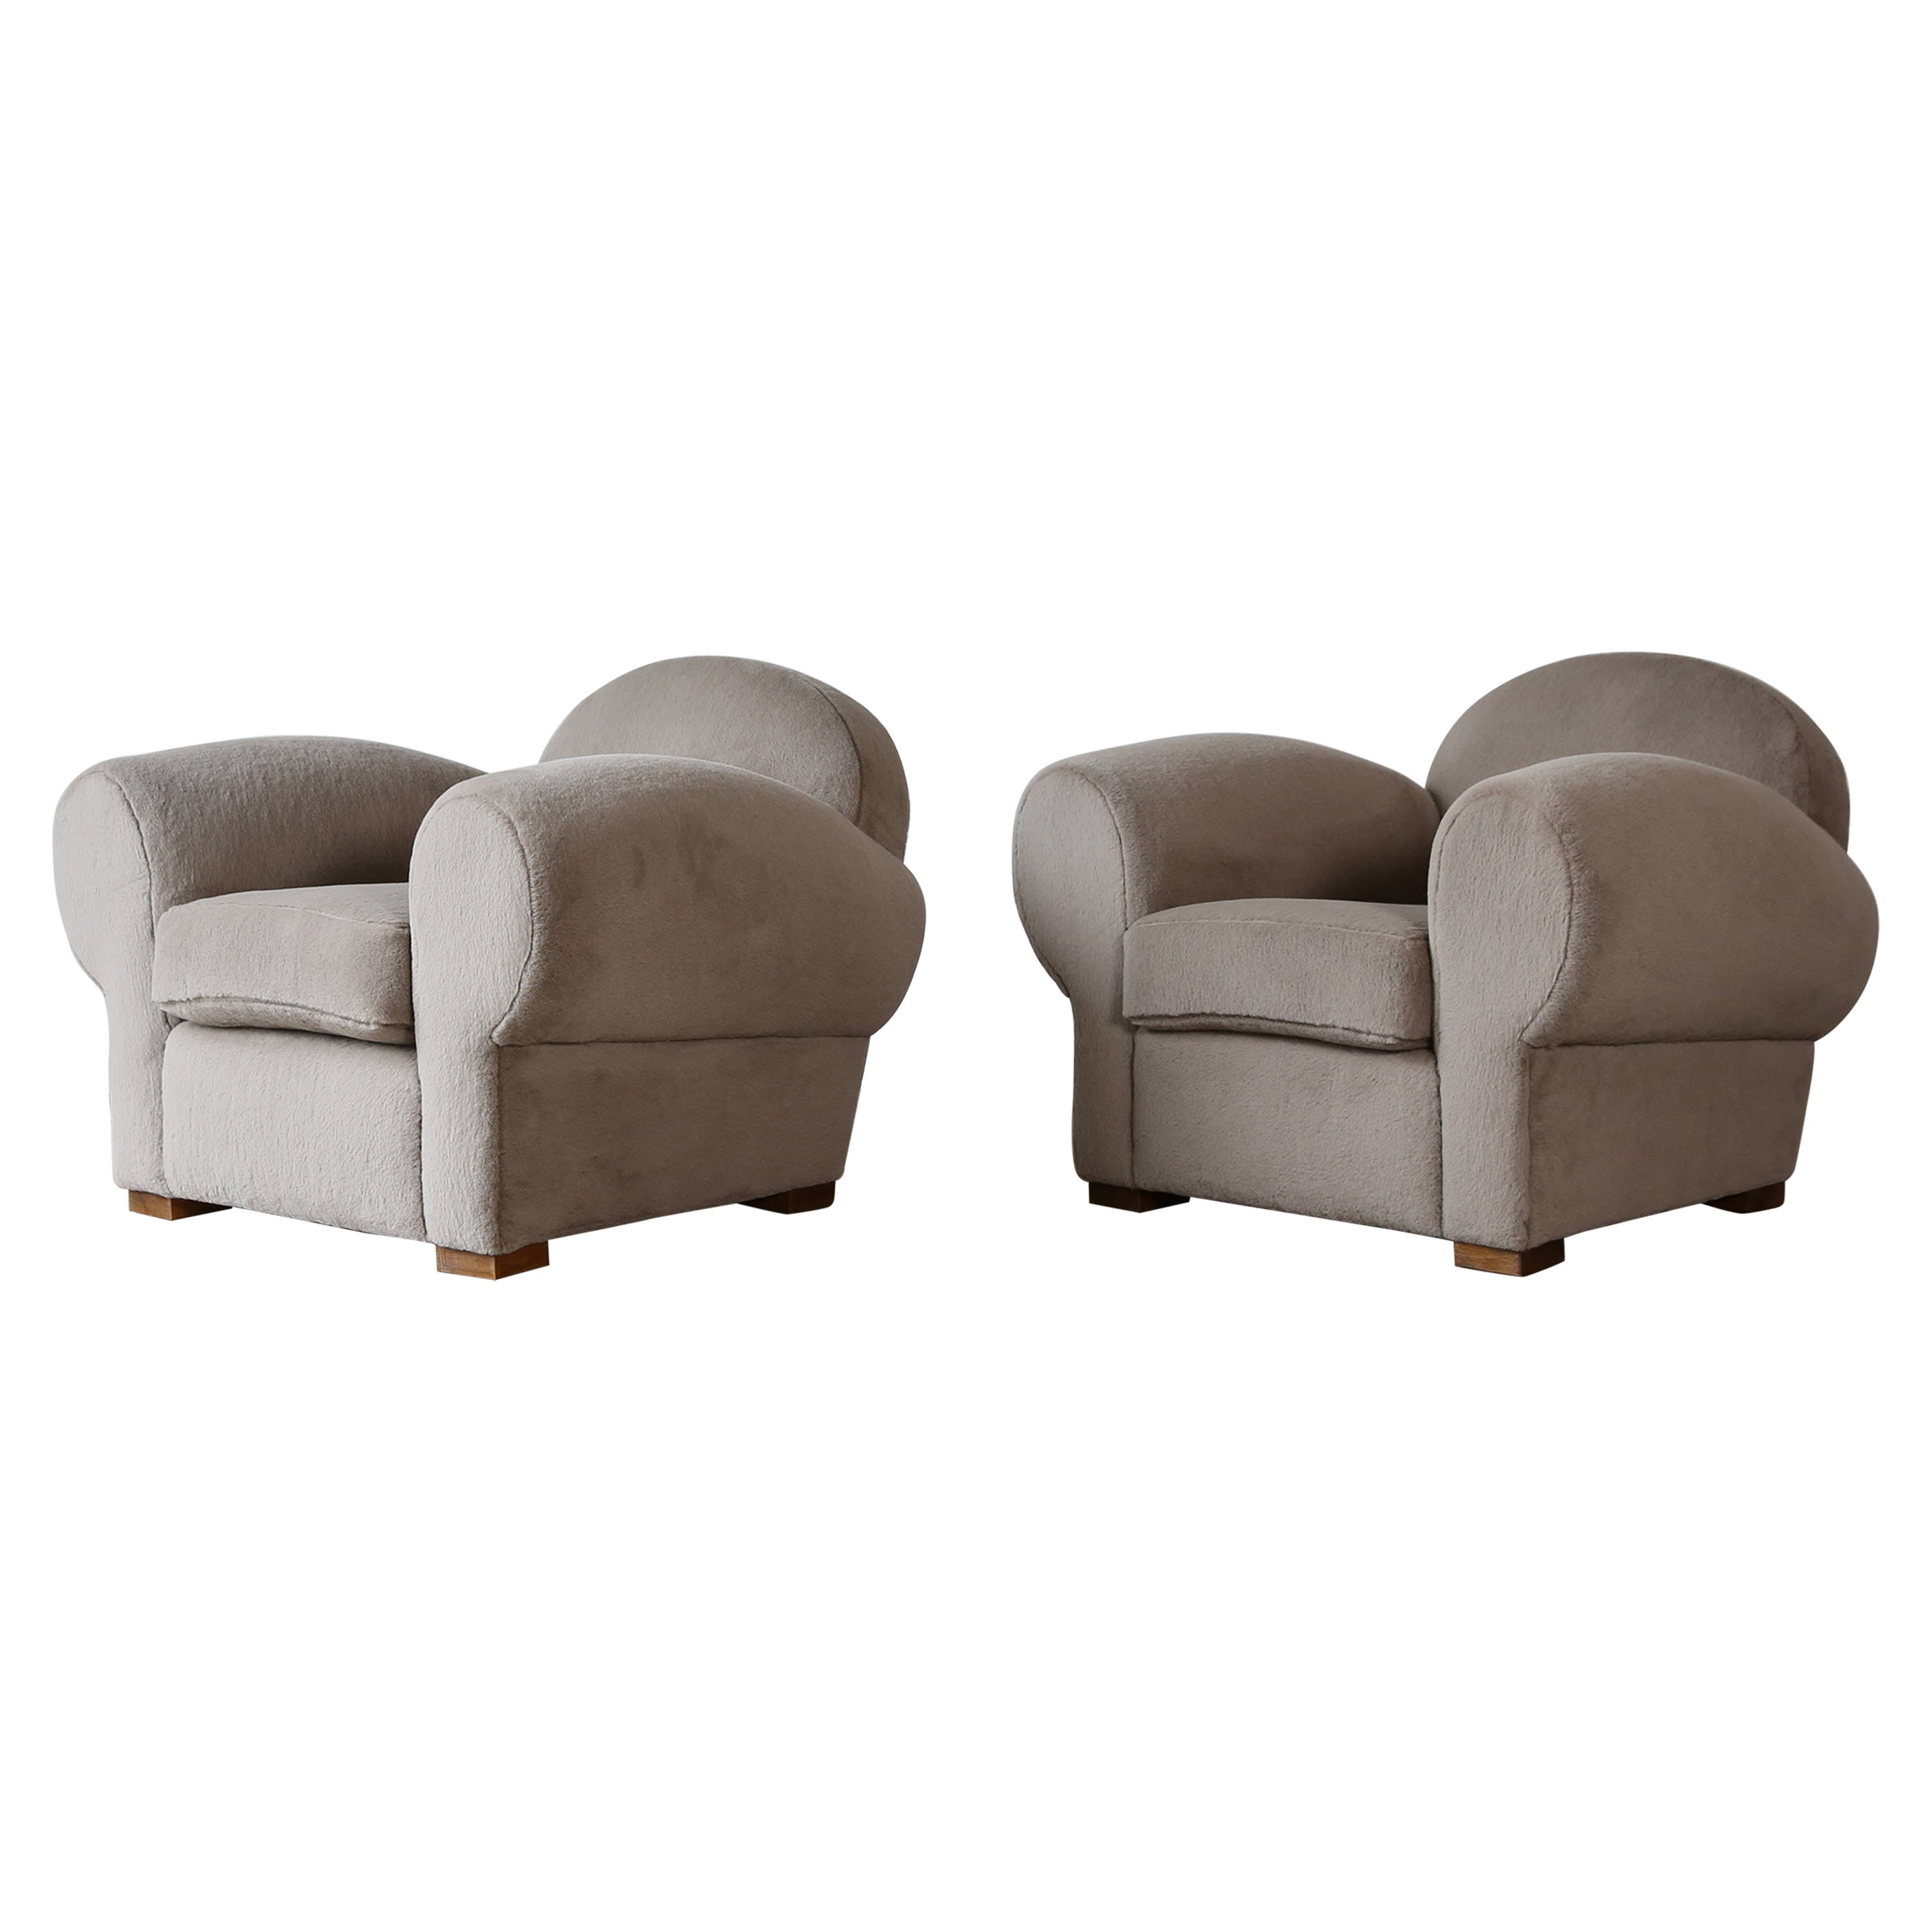 Superb Pair of Club Chairs, Upholstered in Pure Alpaca